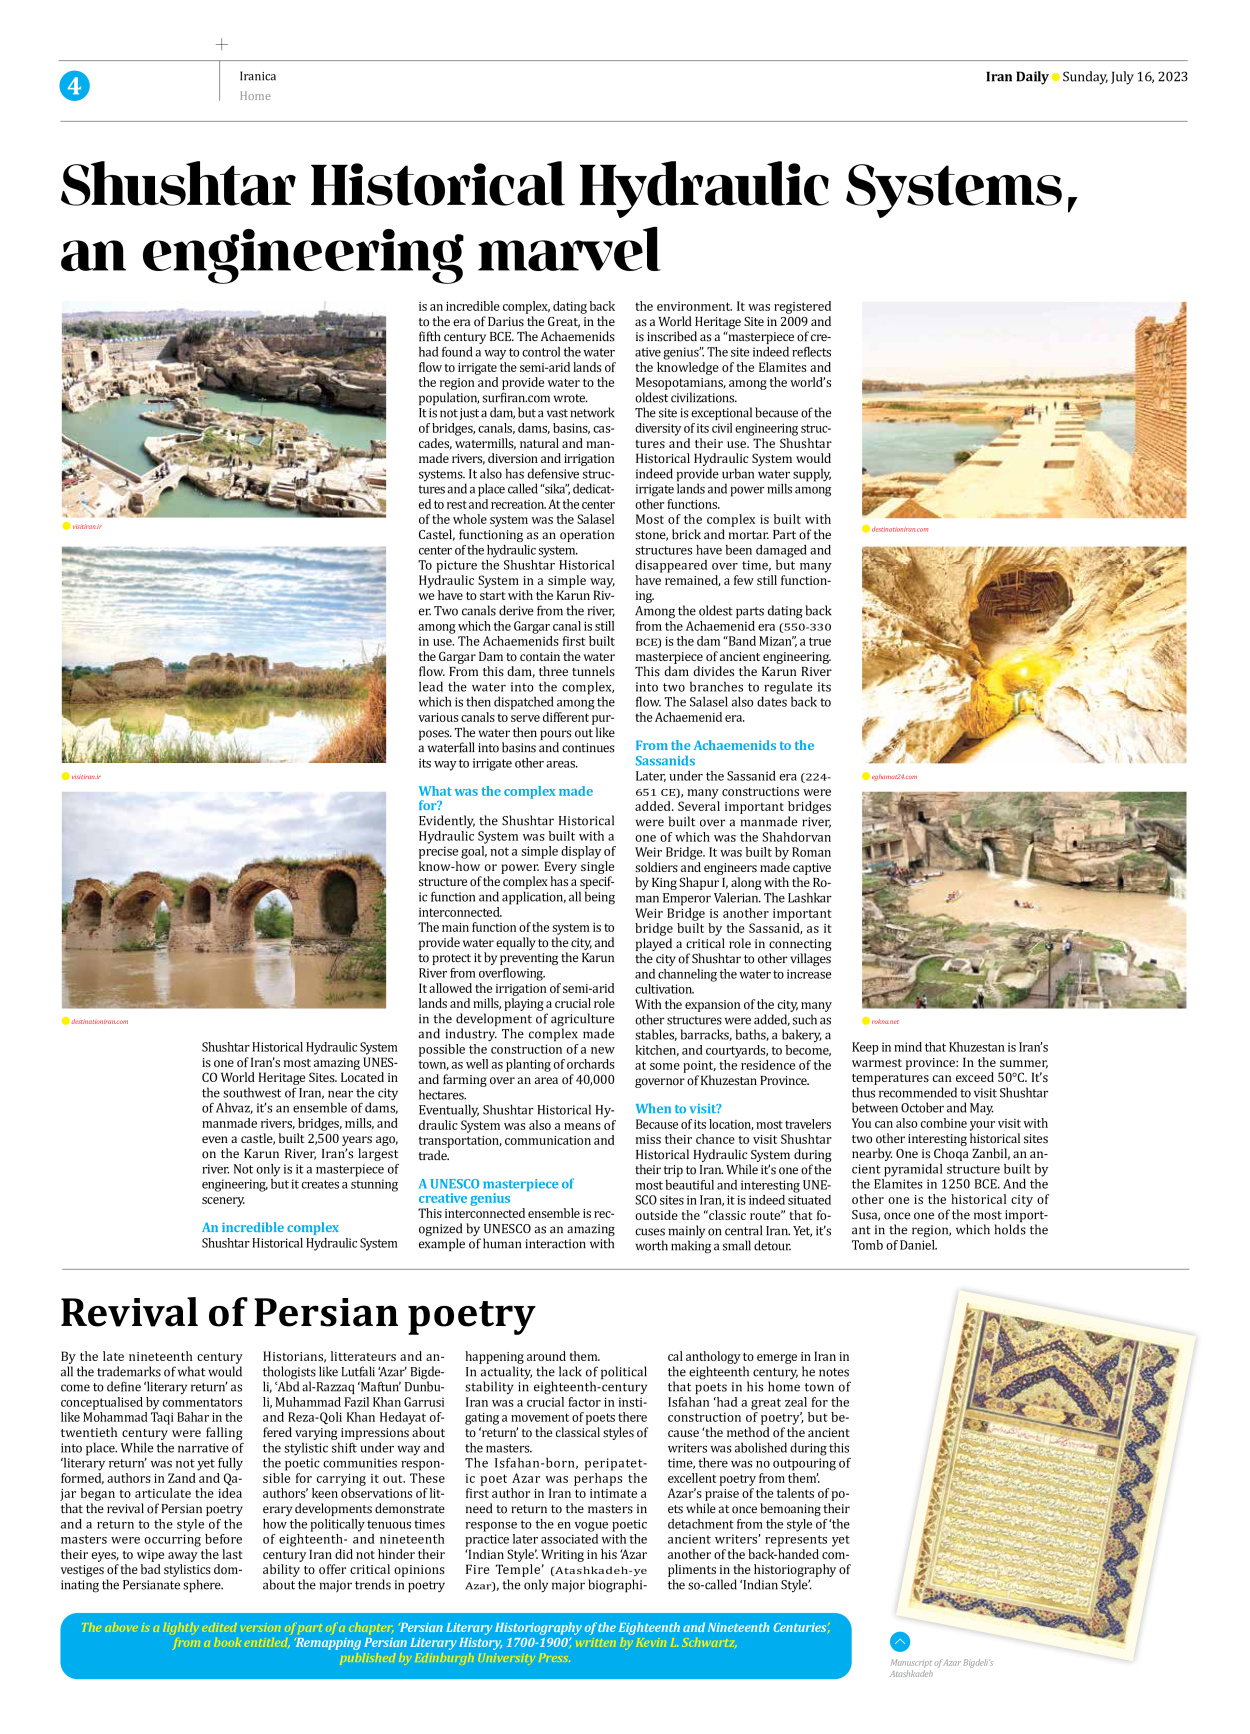 Iran Daily - Number Seven Thousand Three Hundred and Forty - 16 July 2023 - Page 4